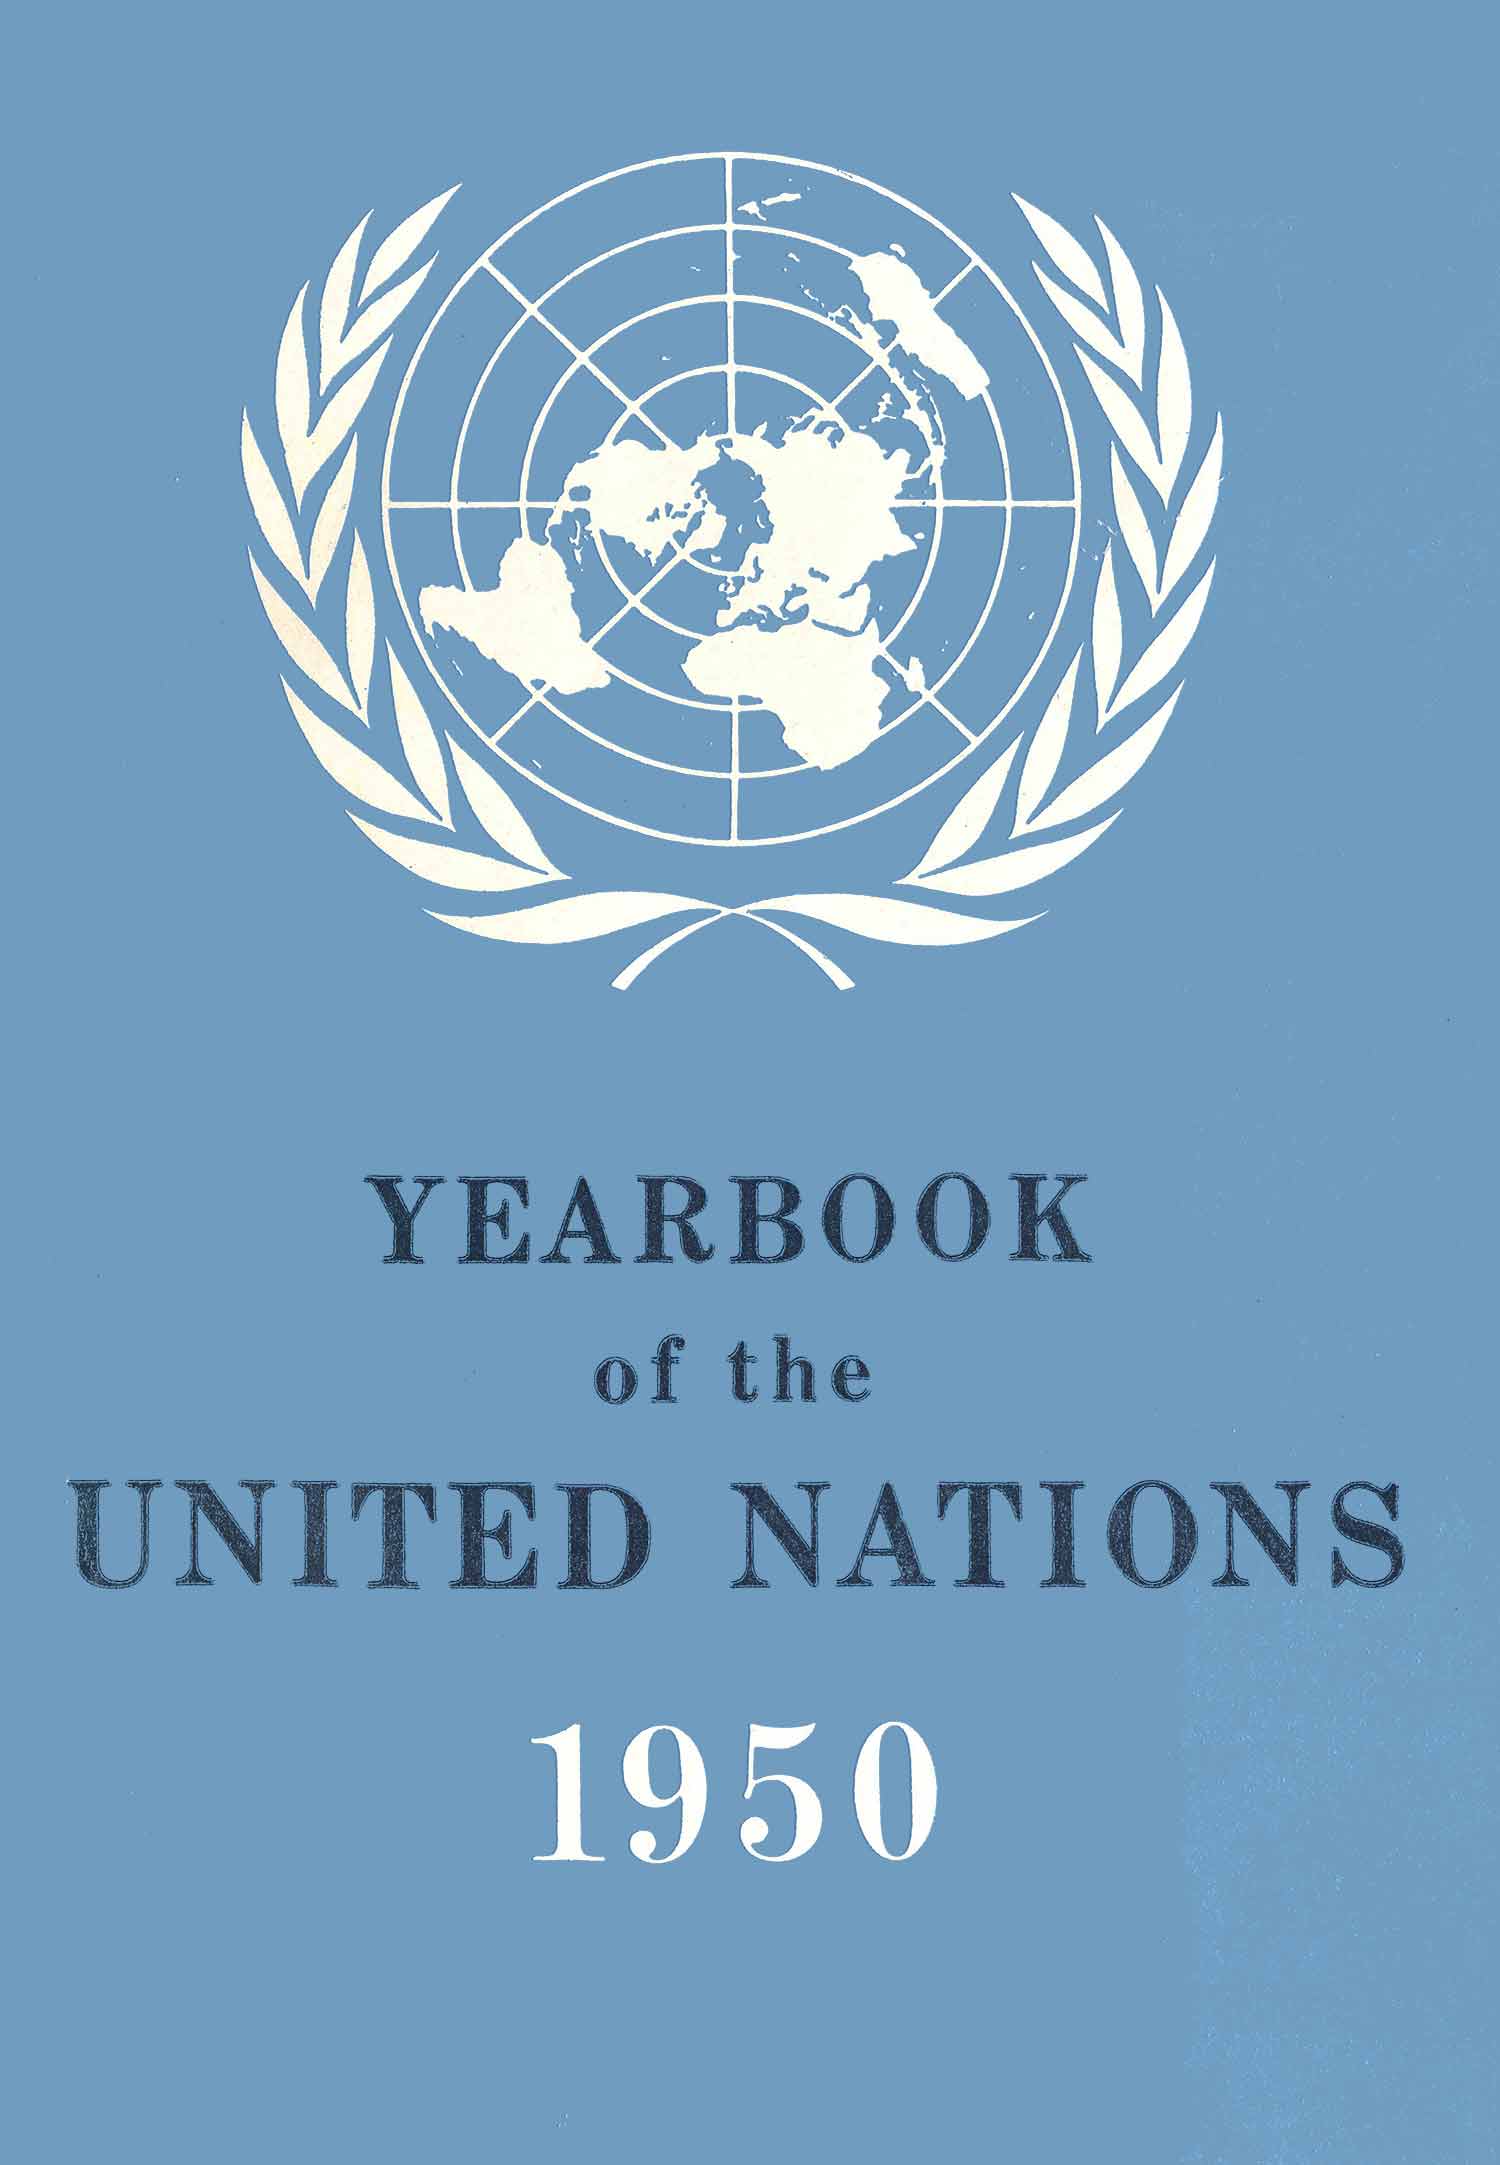 image of Functions and organization of the United Nations